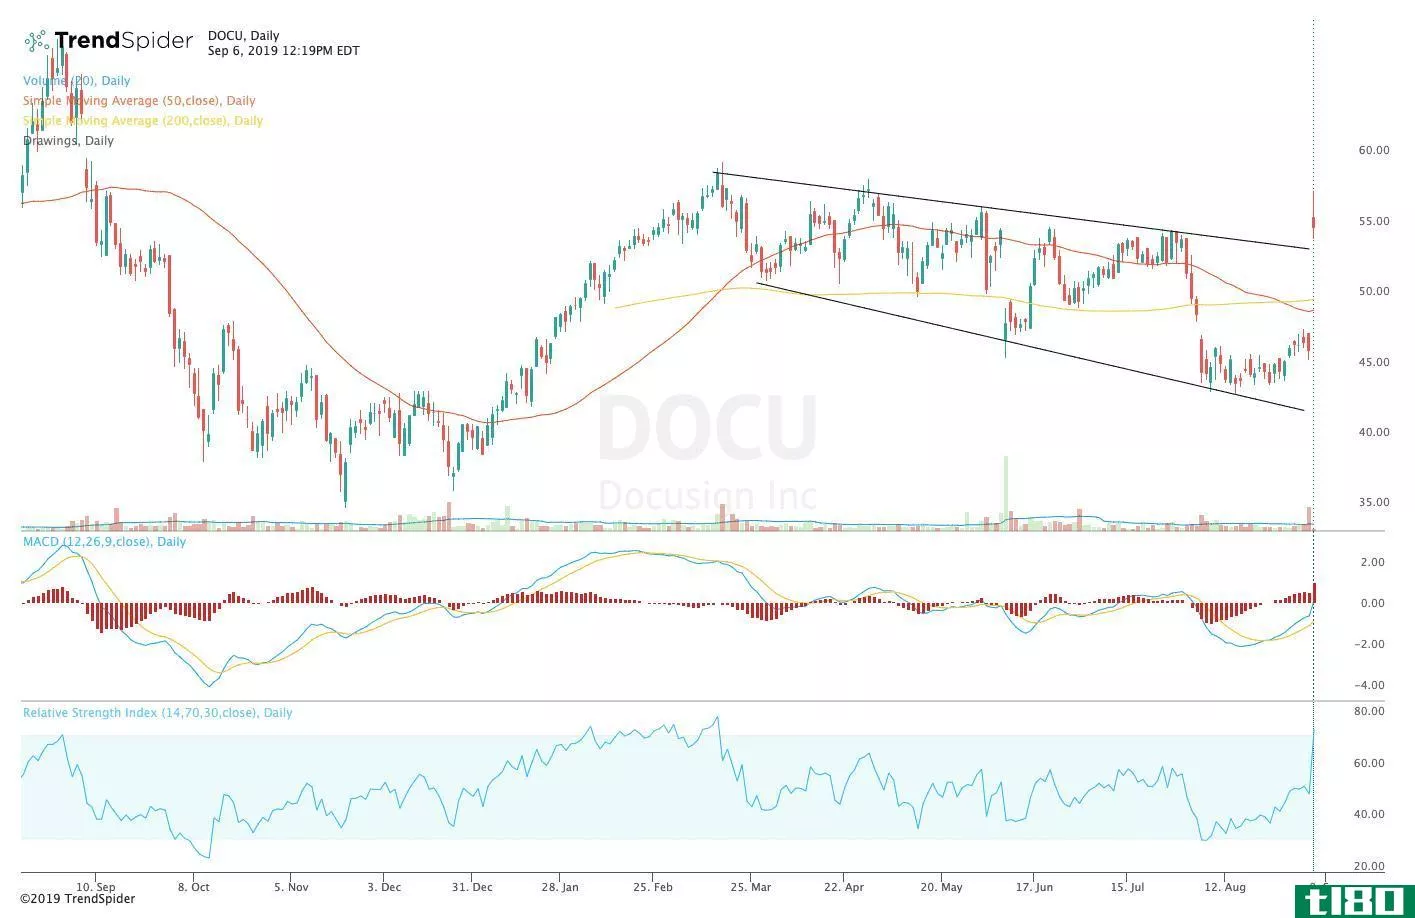 Chart showing the share price performance of DocuSign, Inc. (DOCU)